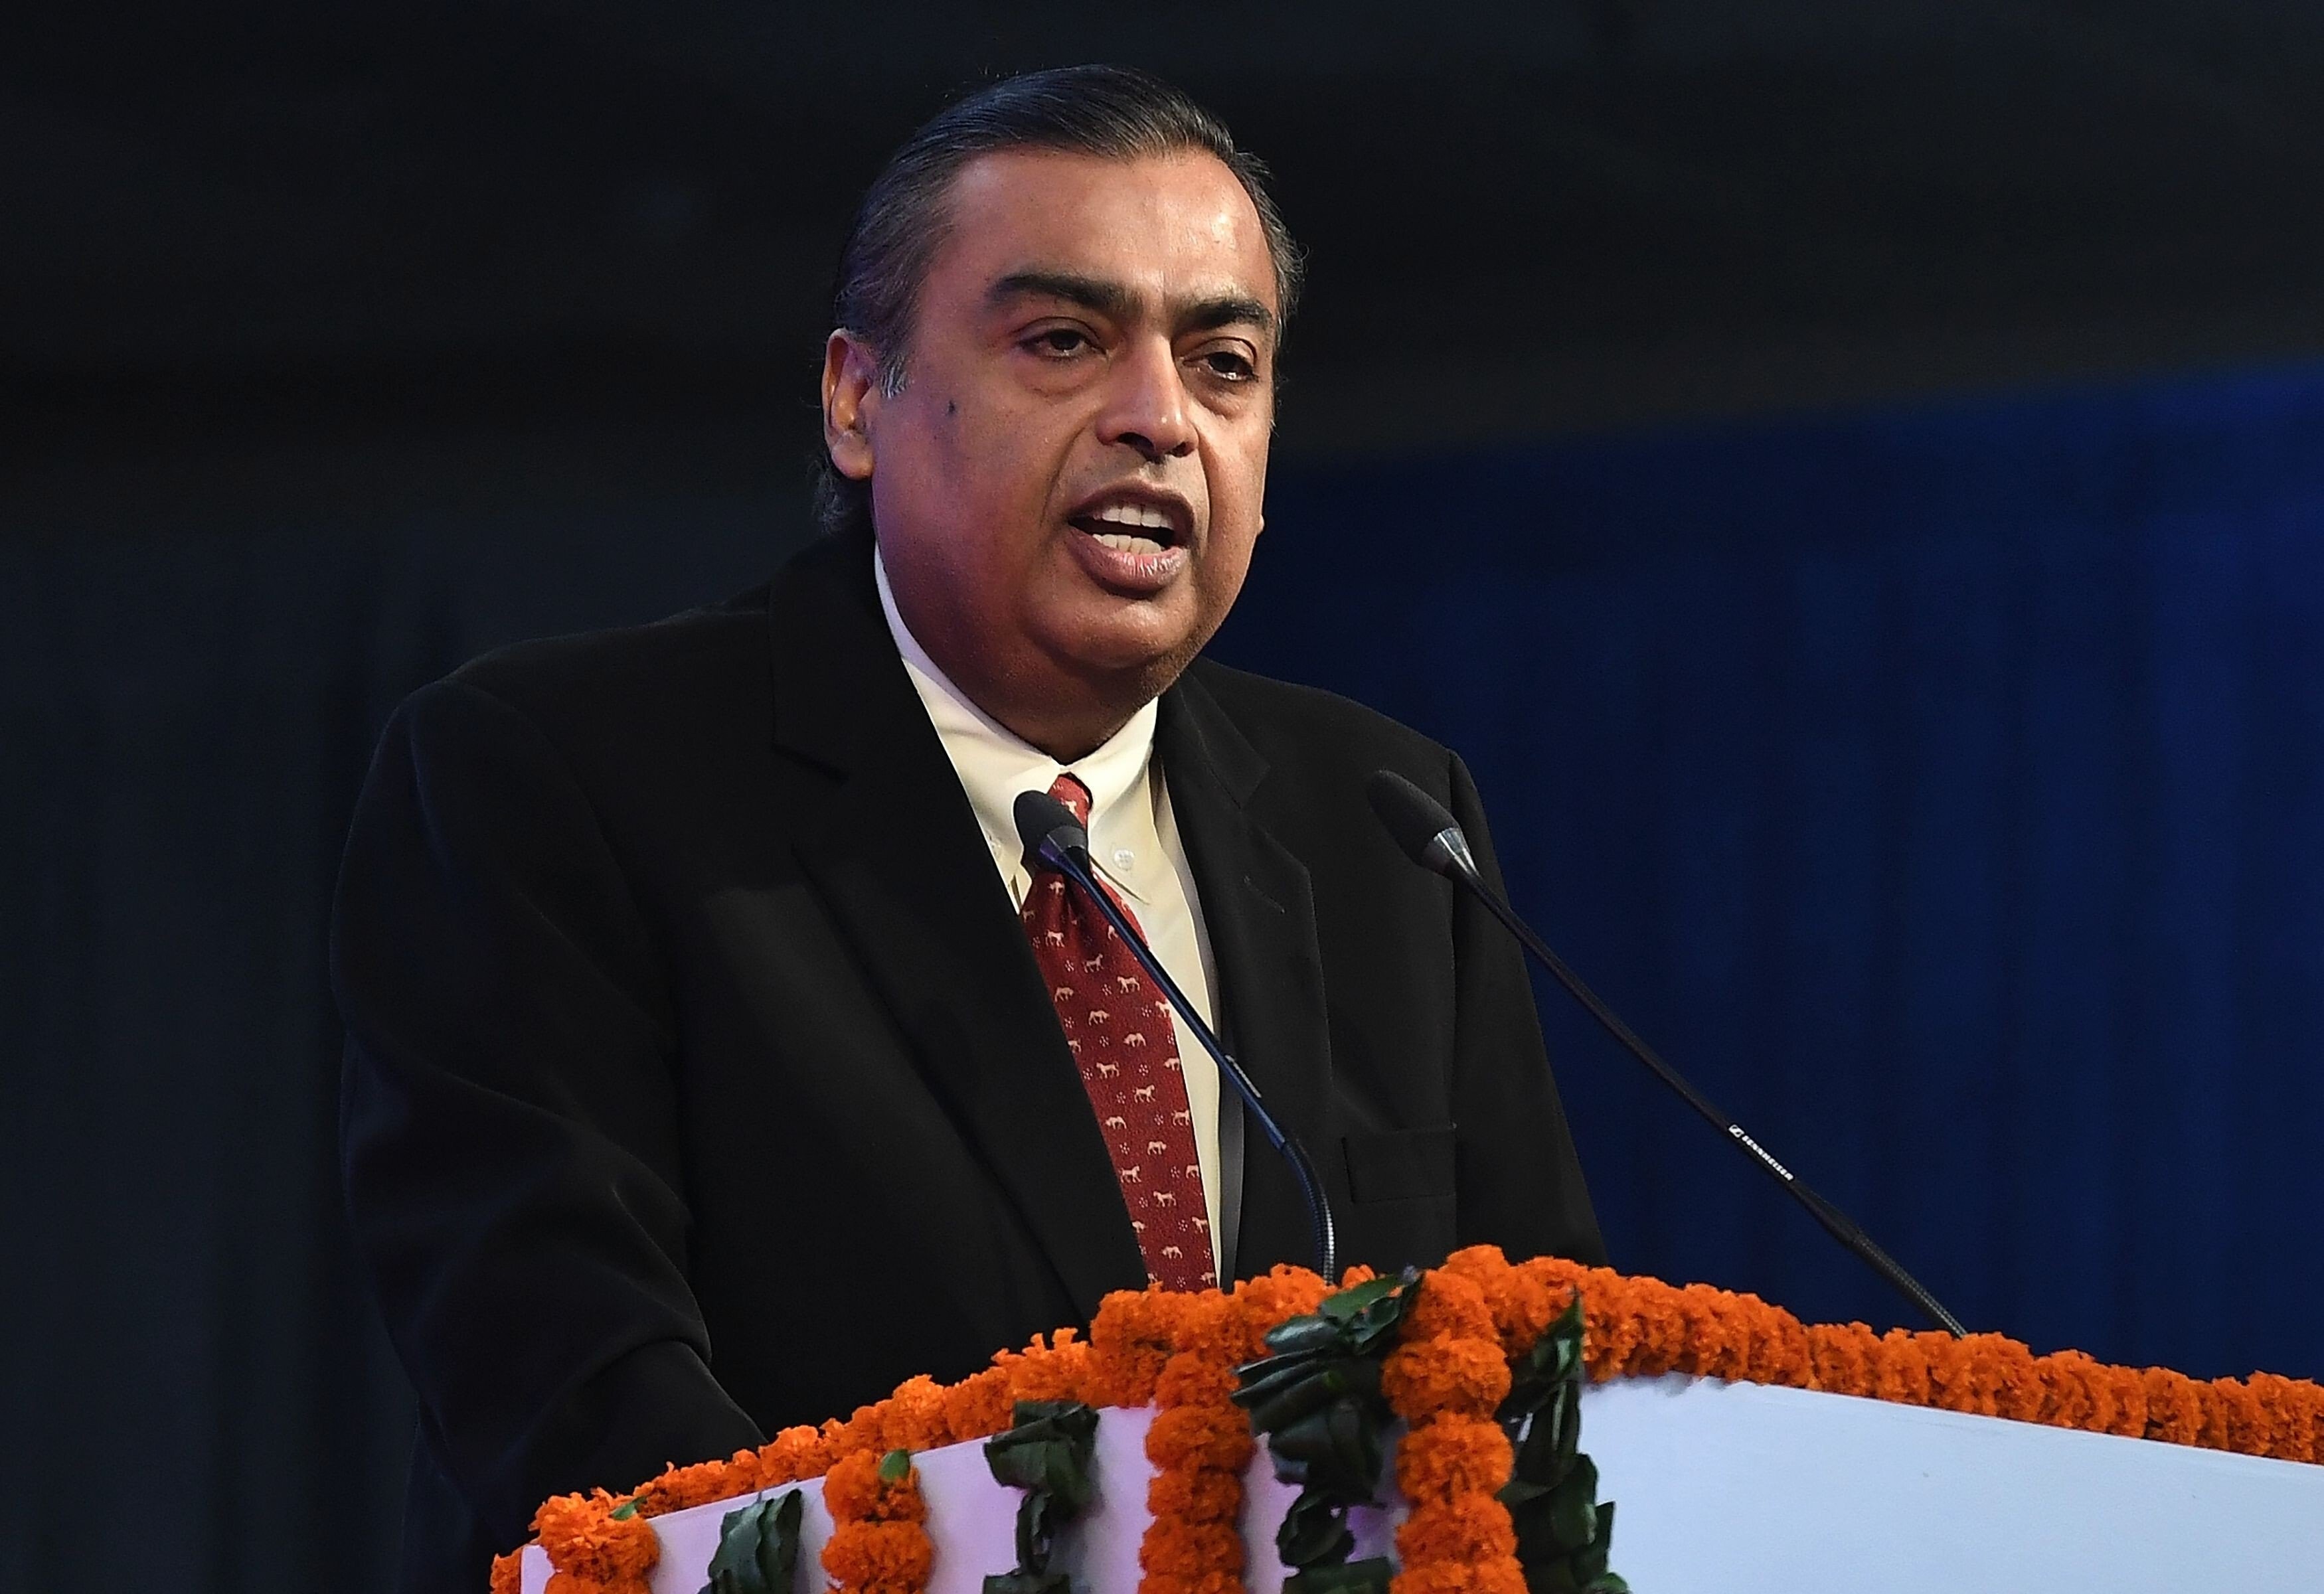 India’s richest man, Mukesh Ambani, chairman of Reliance Industries, may become even richer now that Facebook plans to invest in India. Photo: AFP